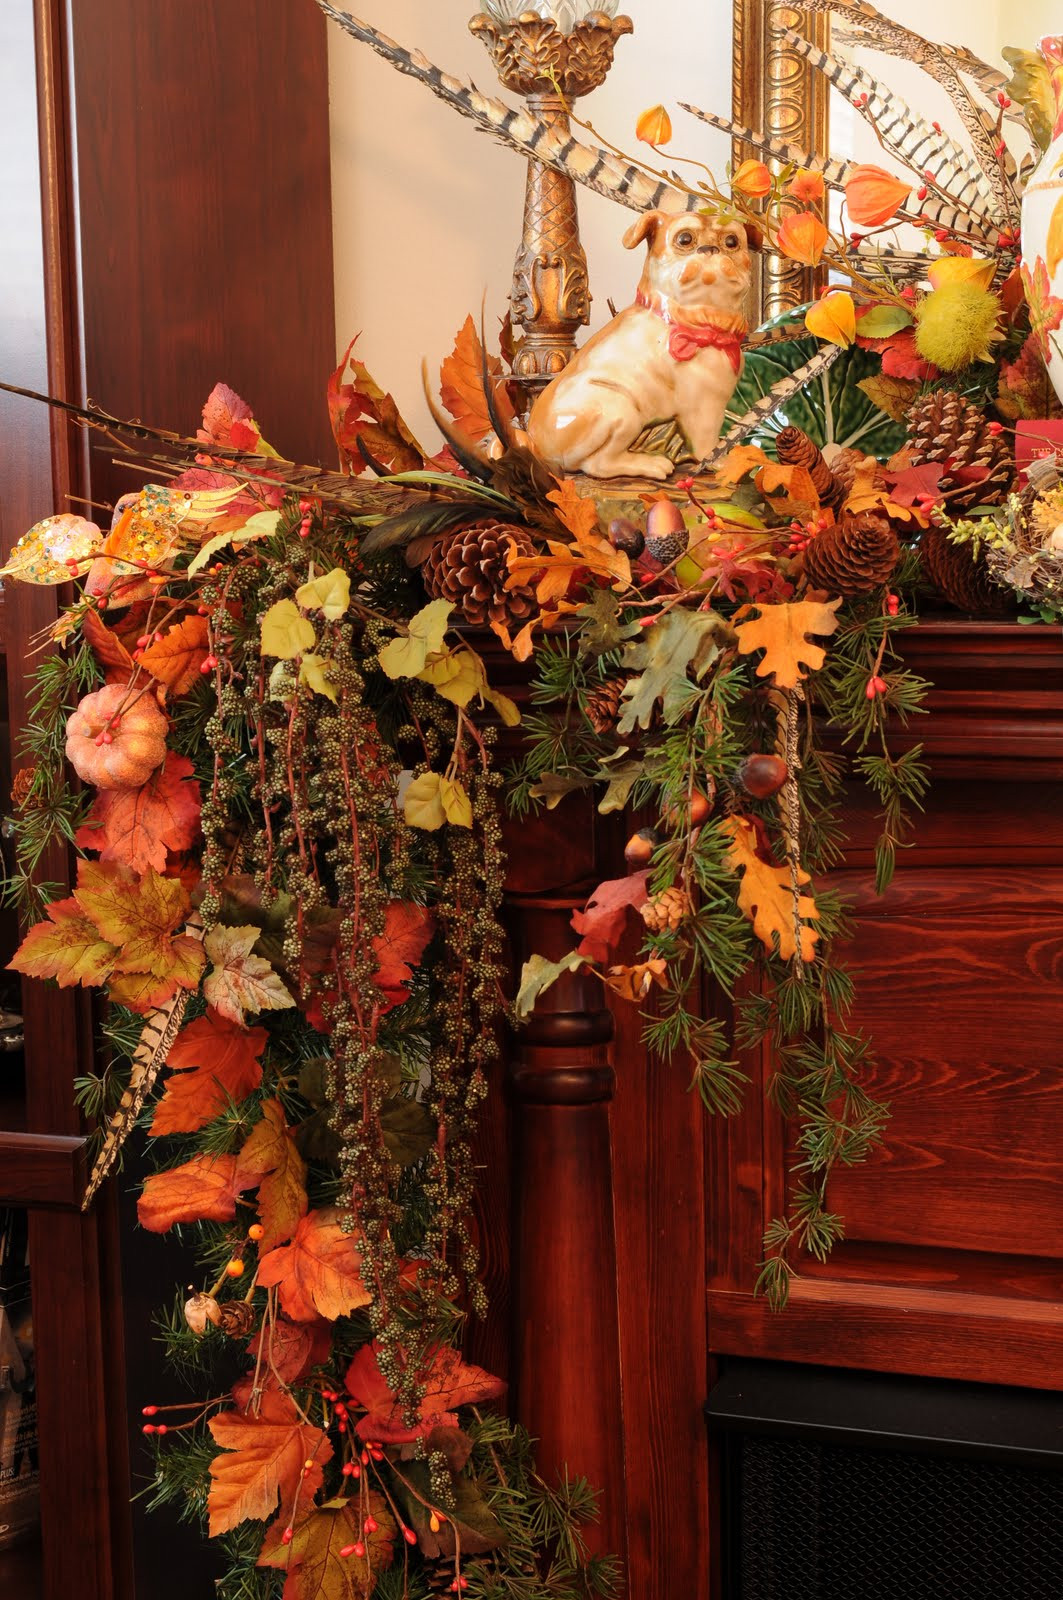 Fall Mantle Decorating Ideas
 Sweet Designs Fall Fireplace Mantel decorating